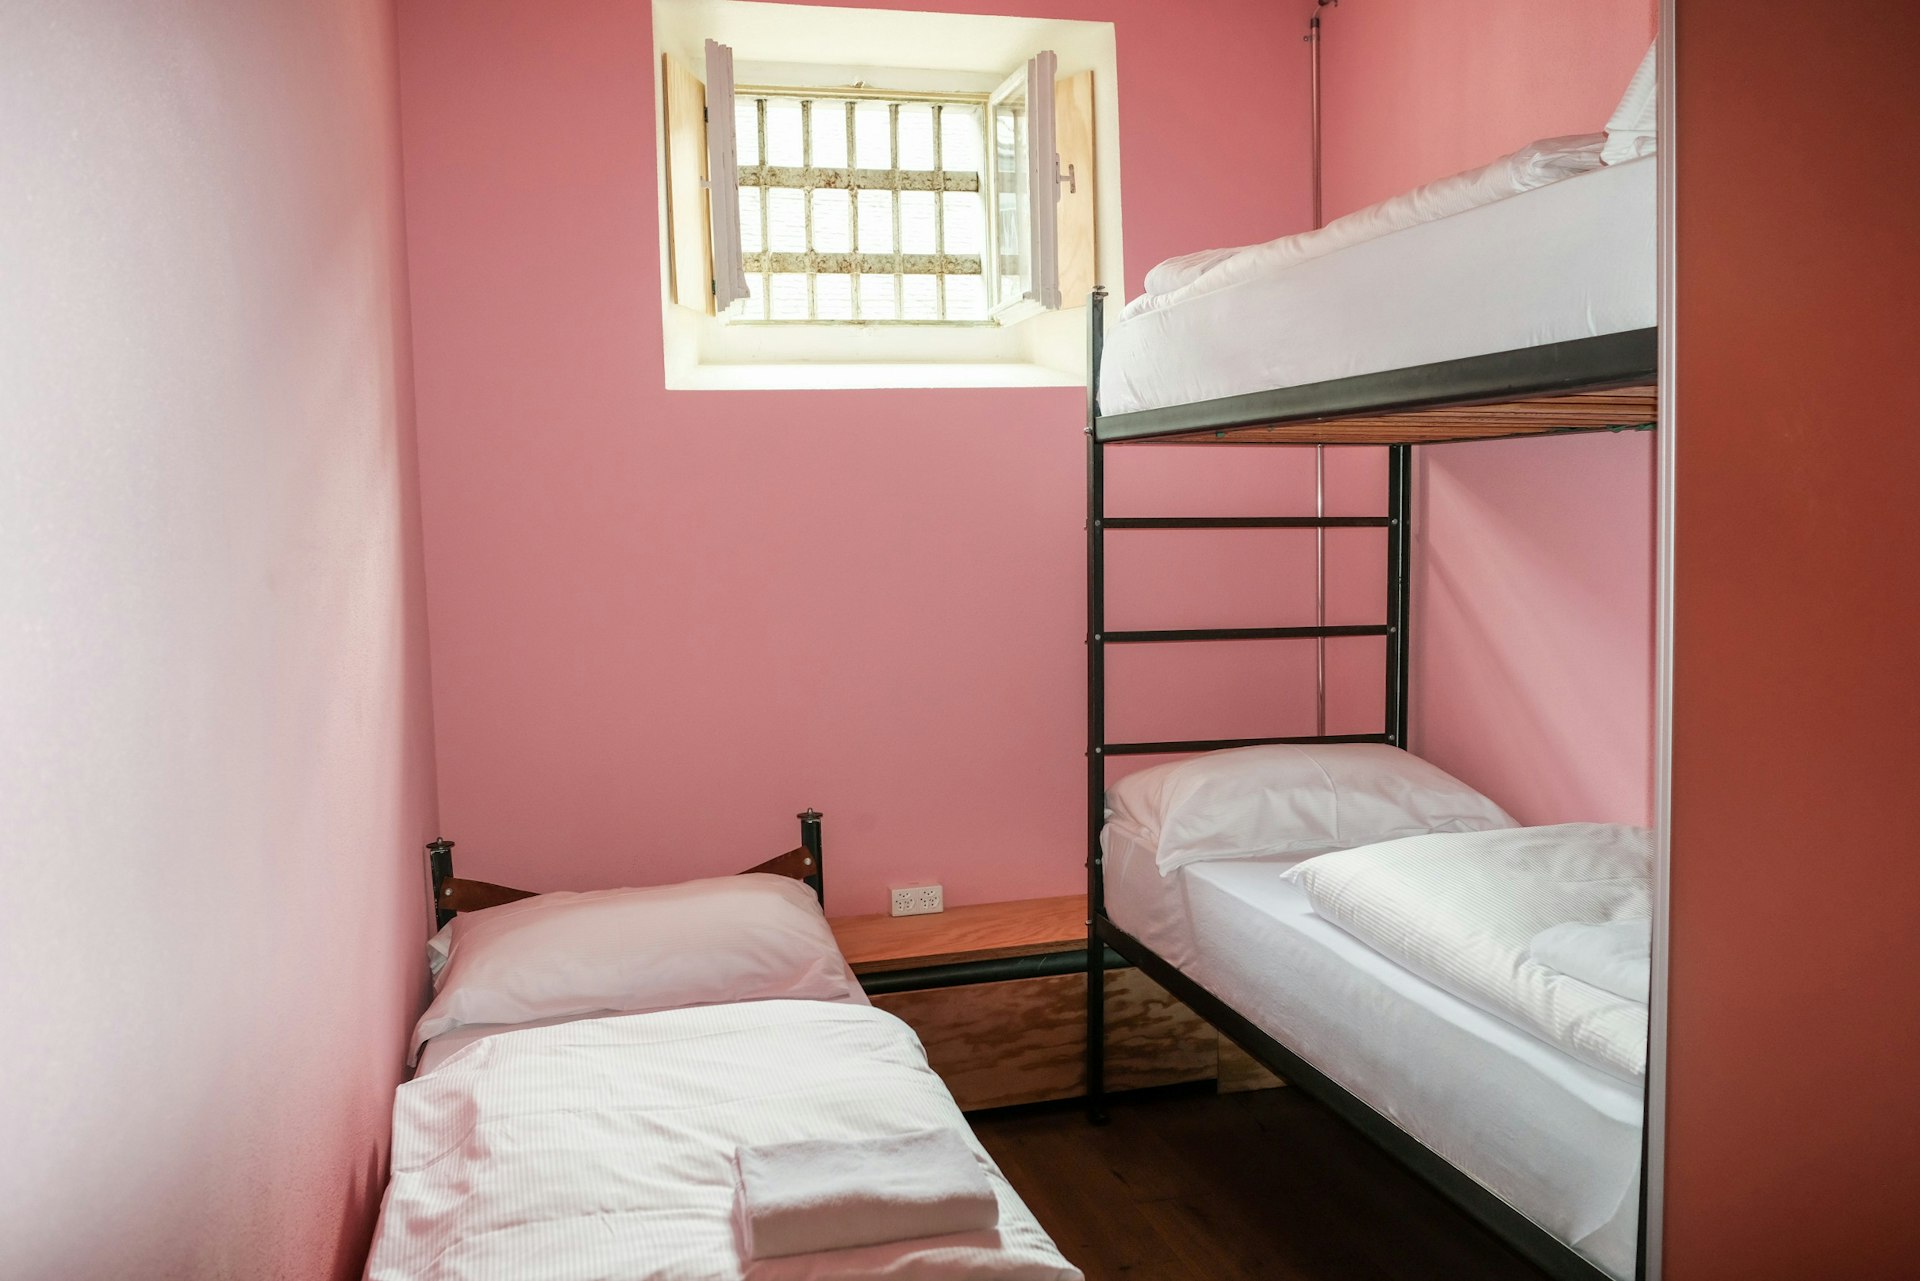 Three dorm beds inside a pink hostel room that was once a prison.